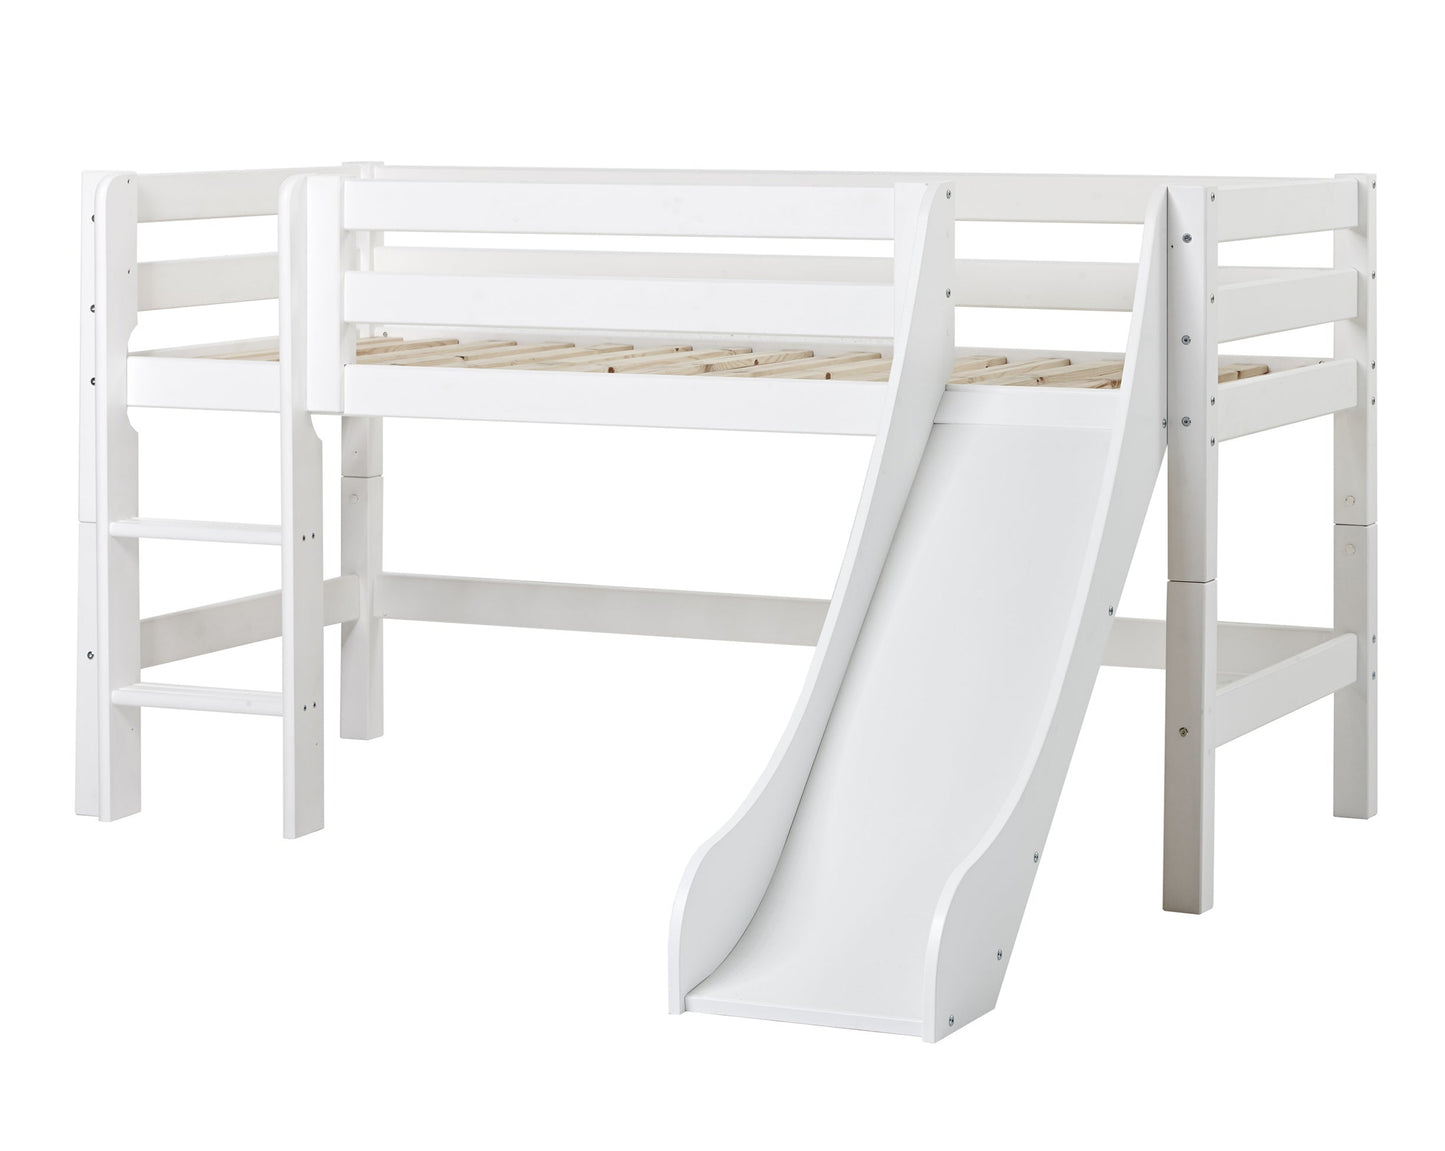 ECO Luxury - Half high bed with slide - 70x160cm - white